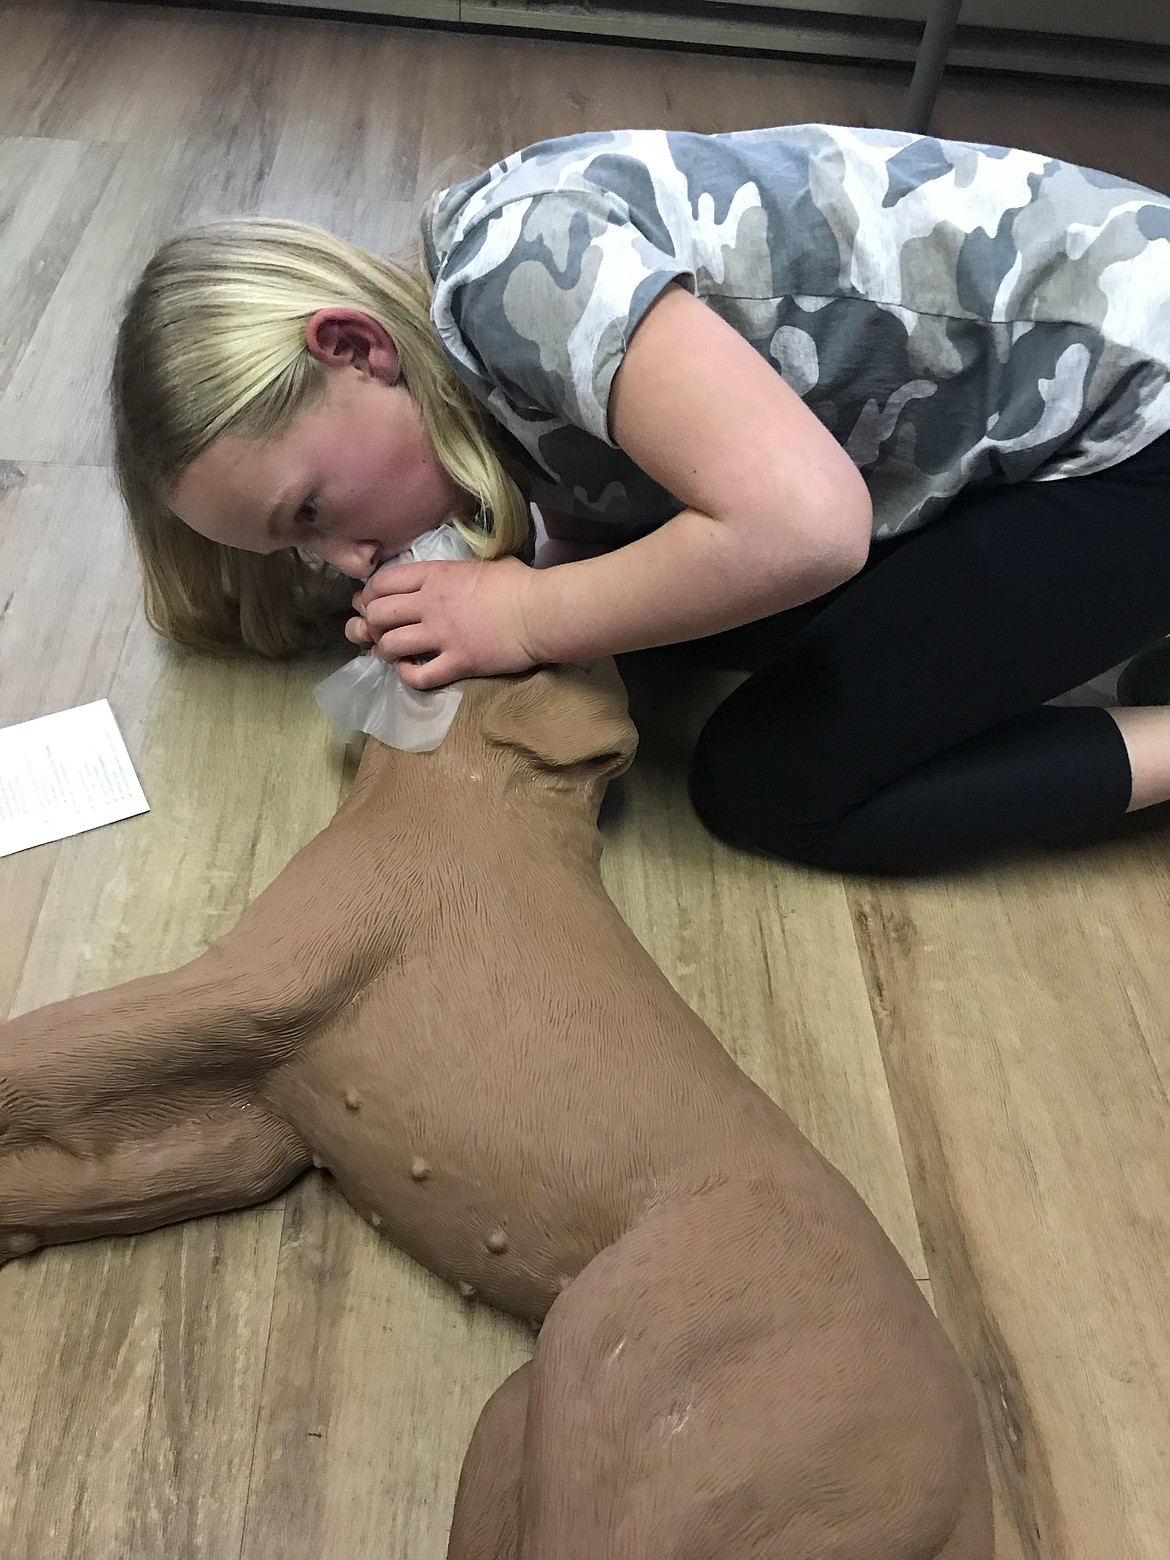 A pet first aid and CPR course attendee practices "mouth to snout" CPR on a canine dummy.
Courtesy photo